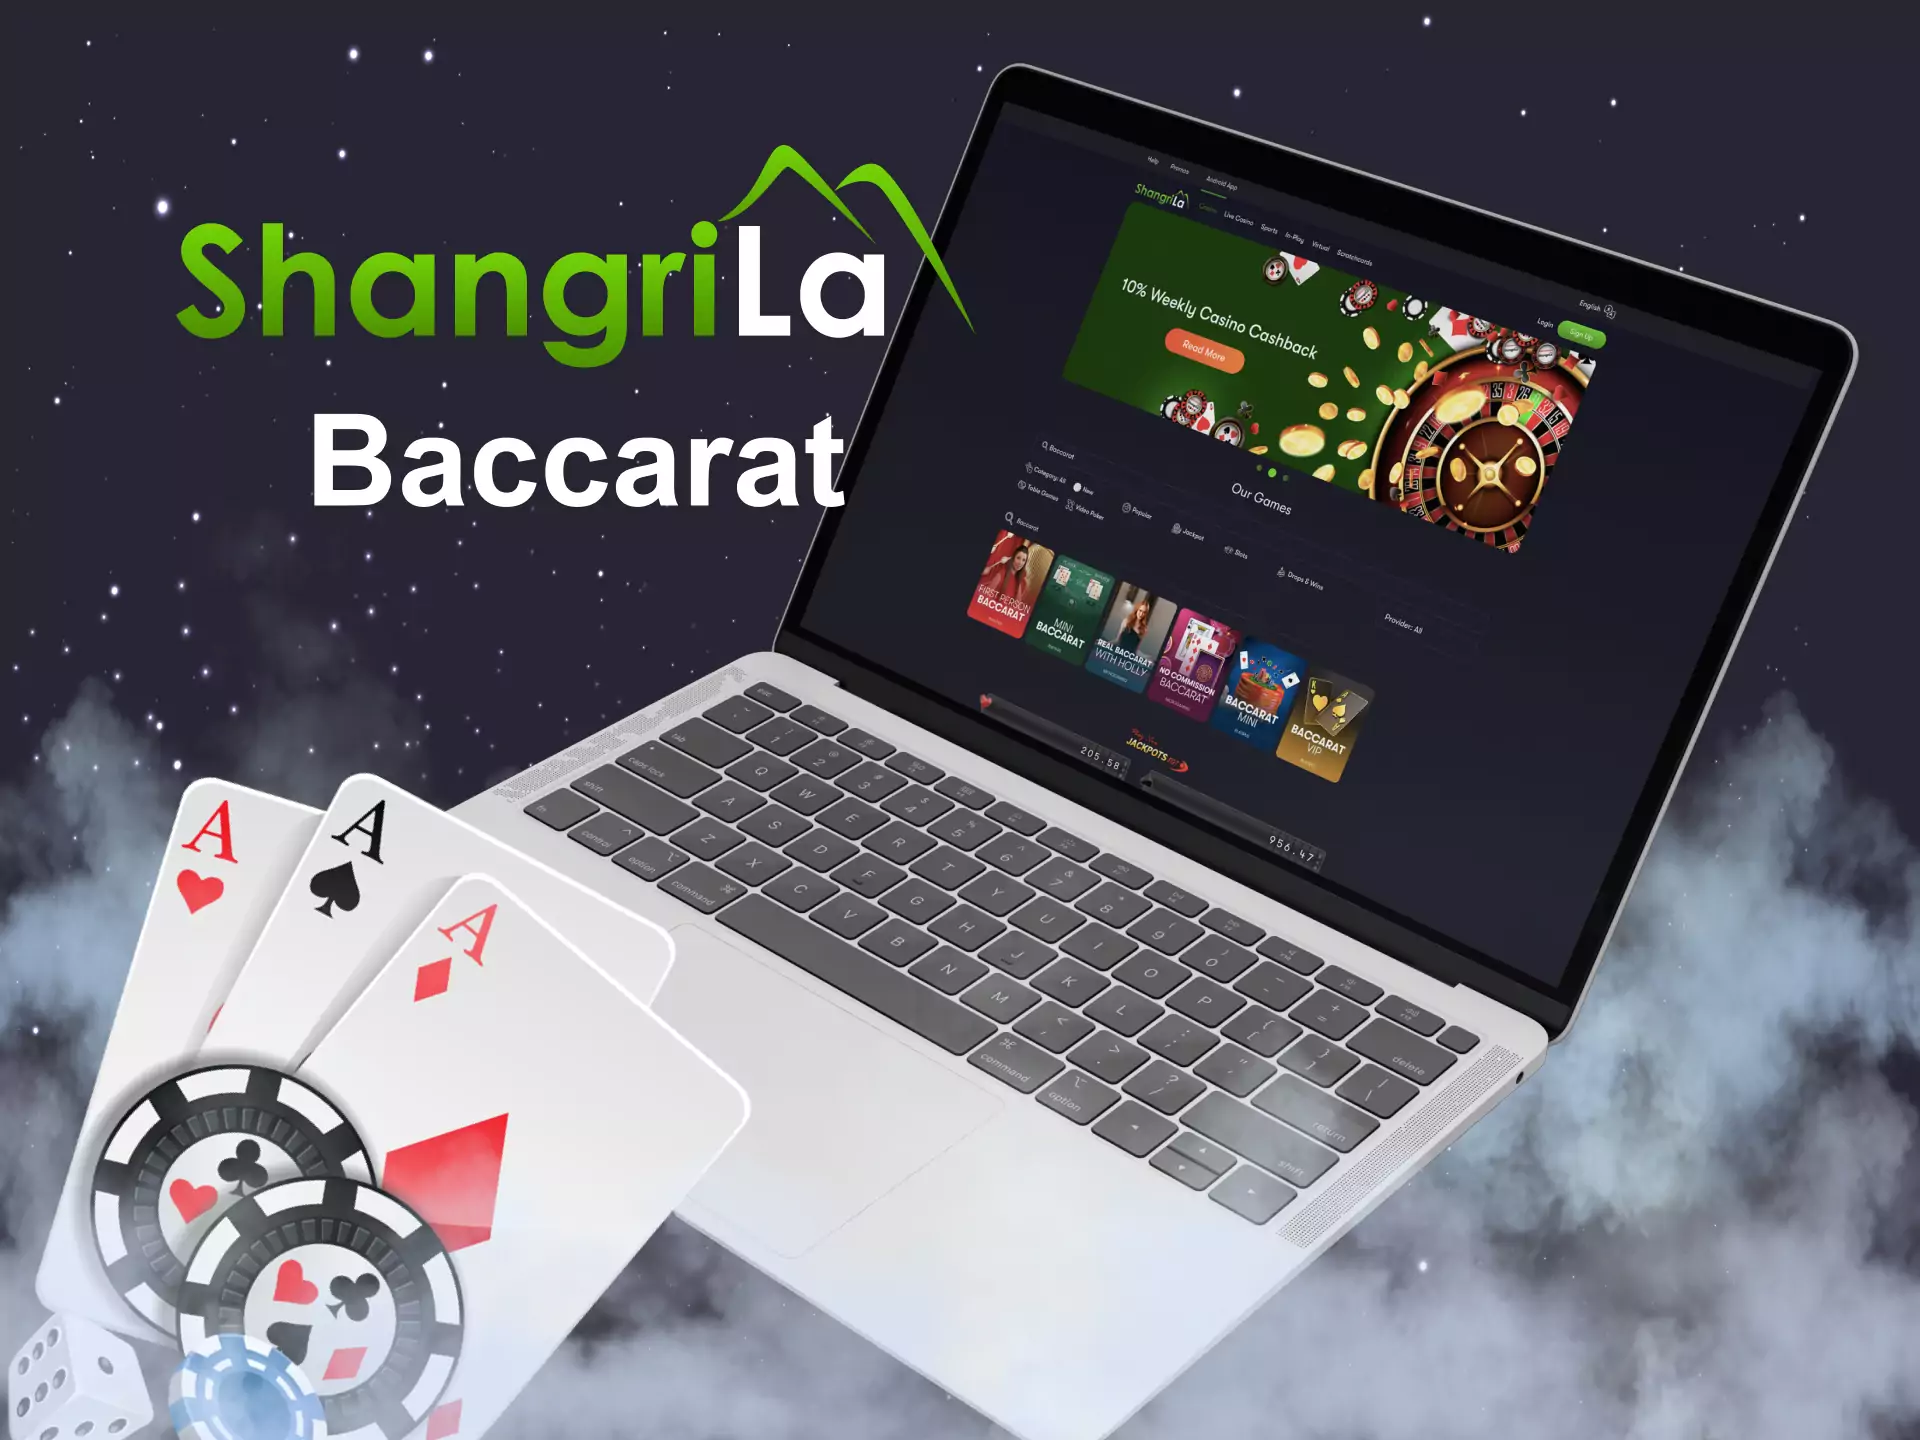 Baccarat is a classic fortune game that you can play in the Shangri La casino.